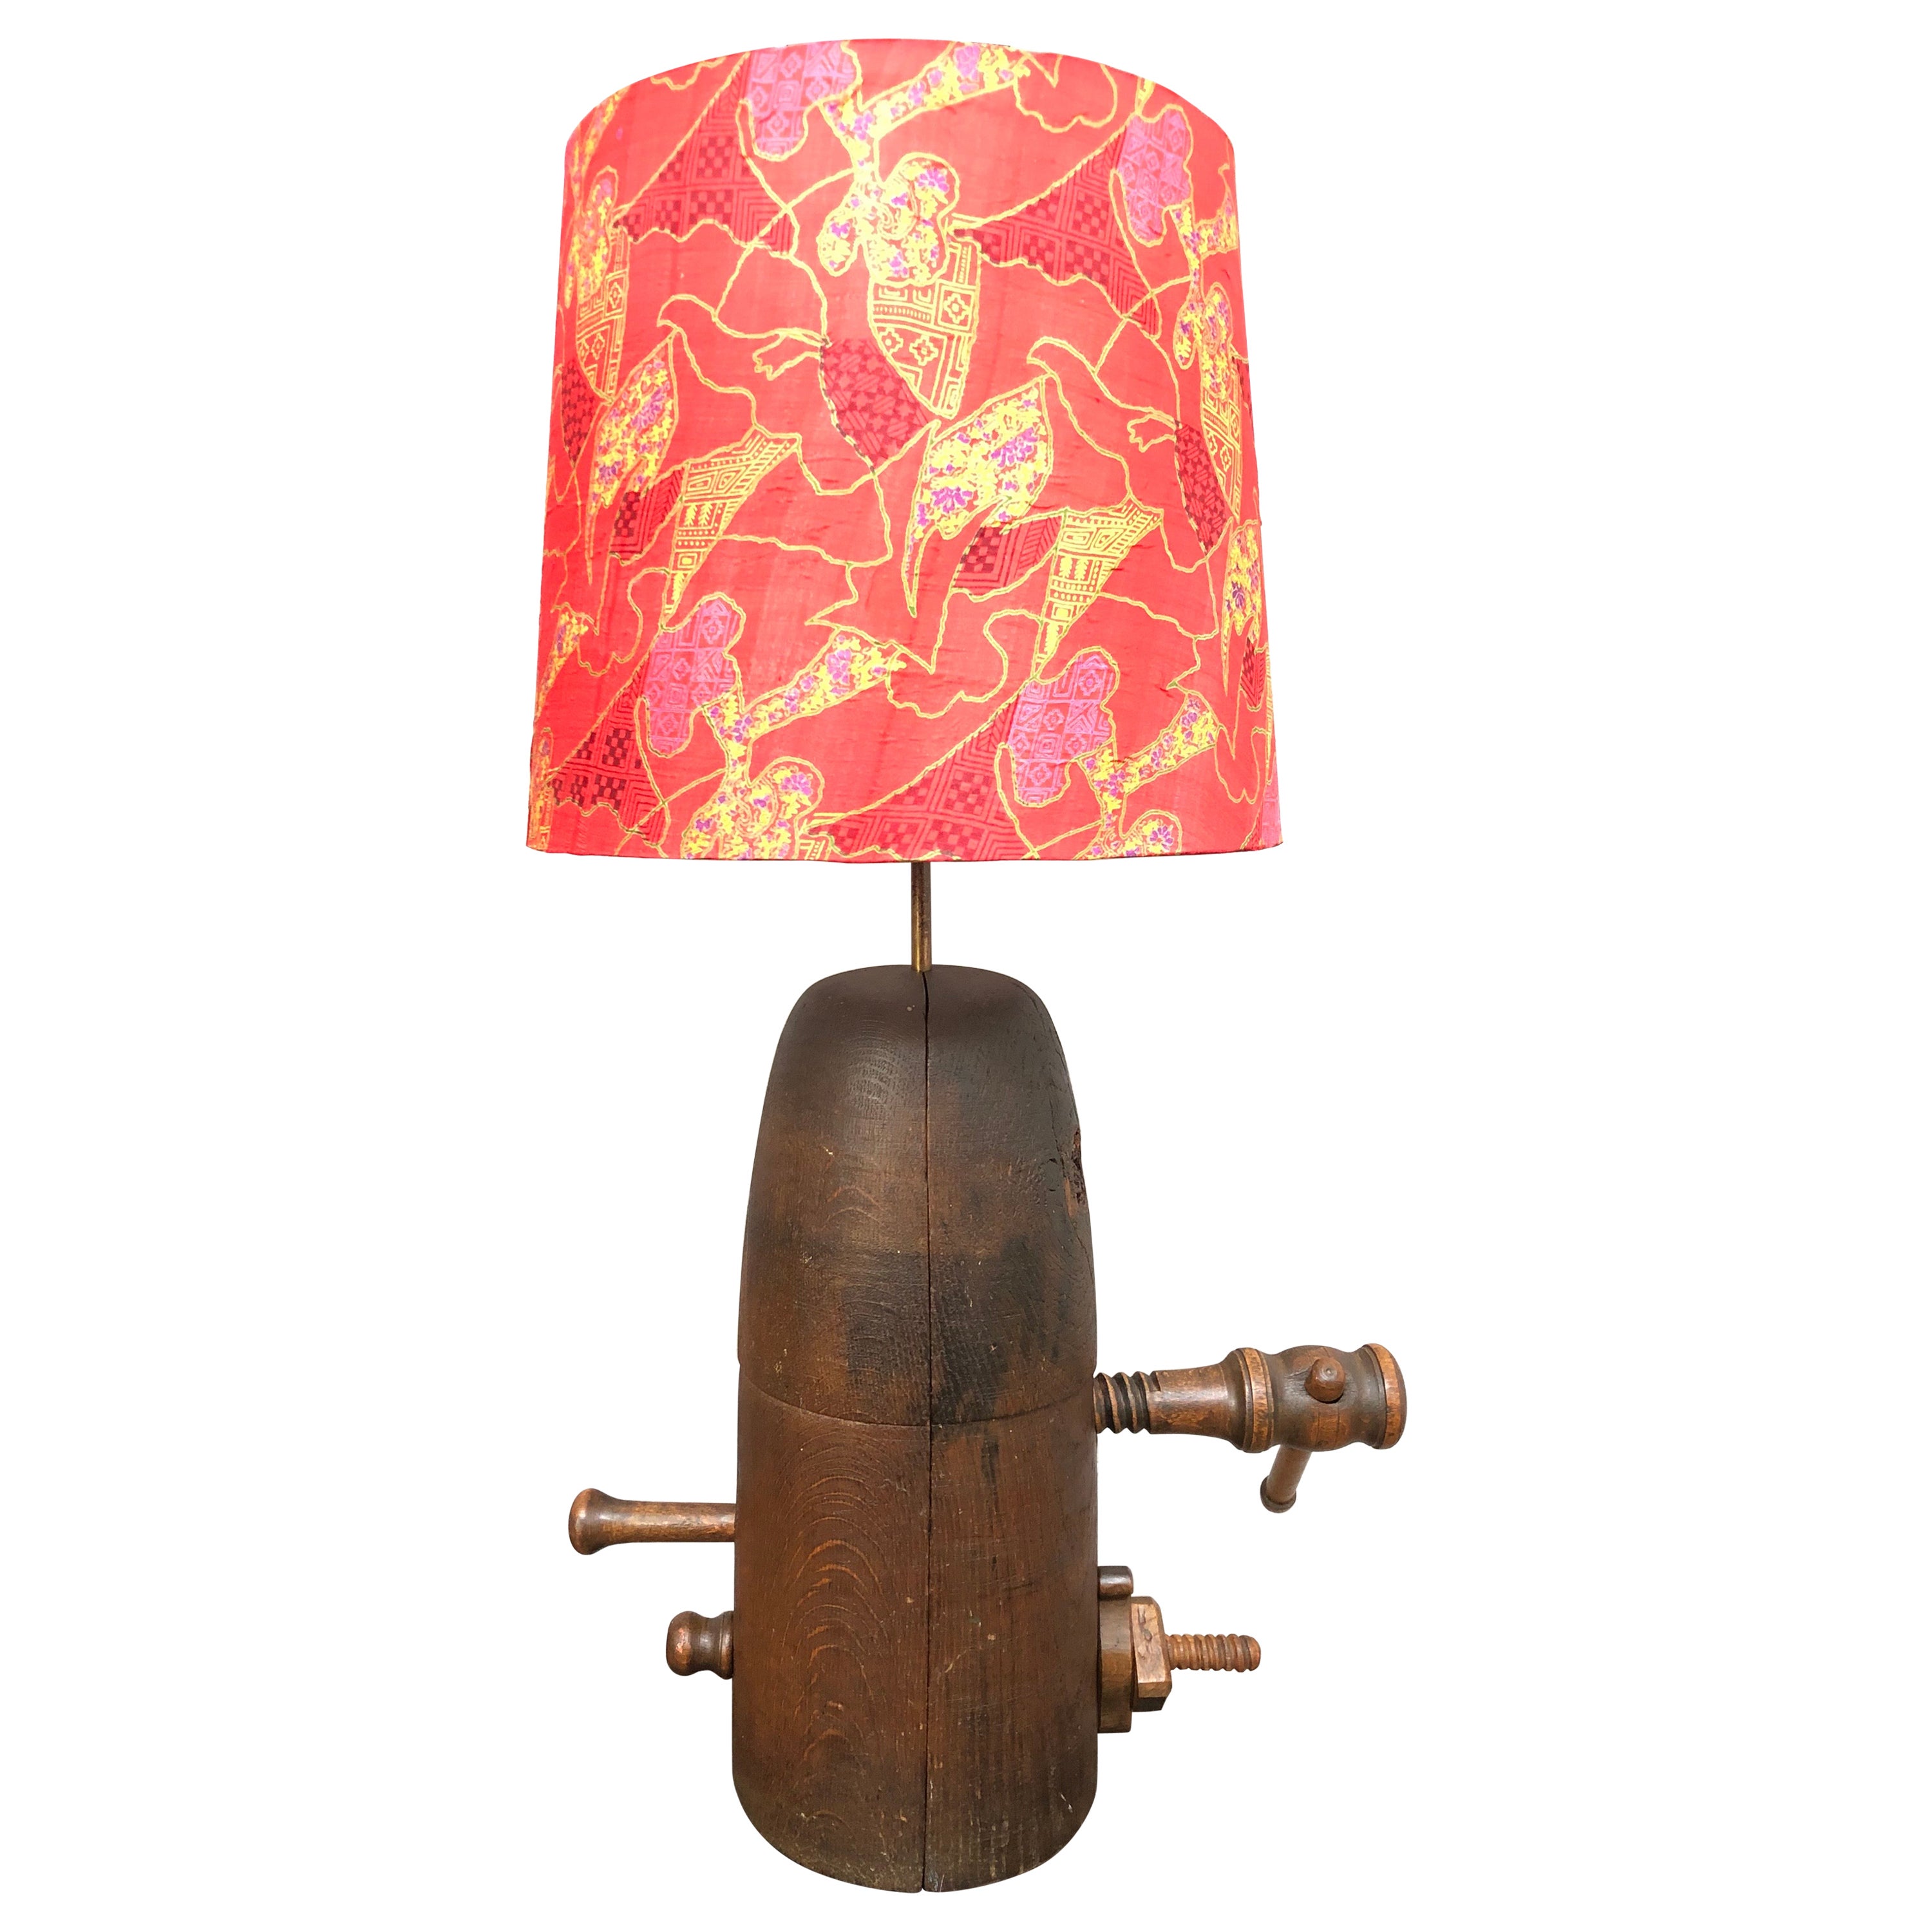 Truly Stunning Antique Wooden Hat Stretcher Stand Table Lamp For Sale